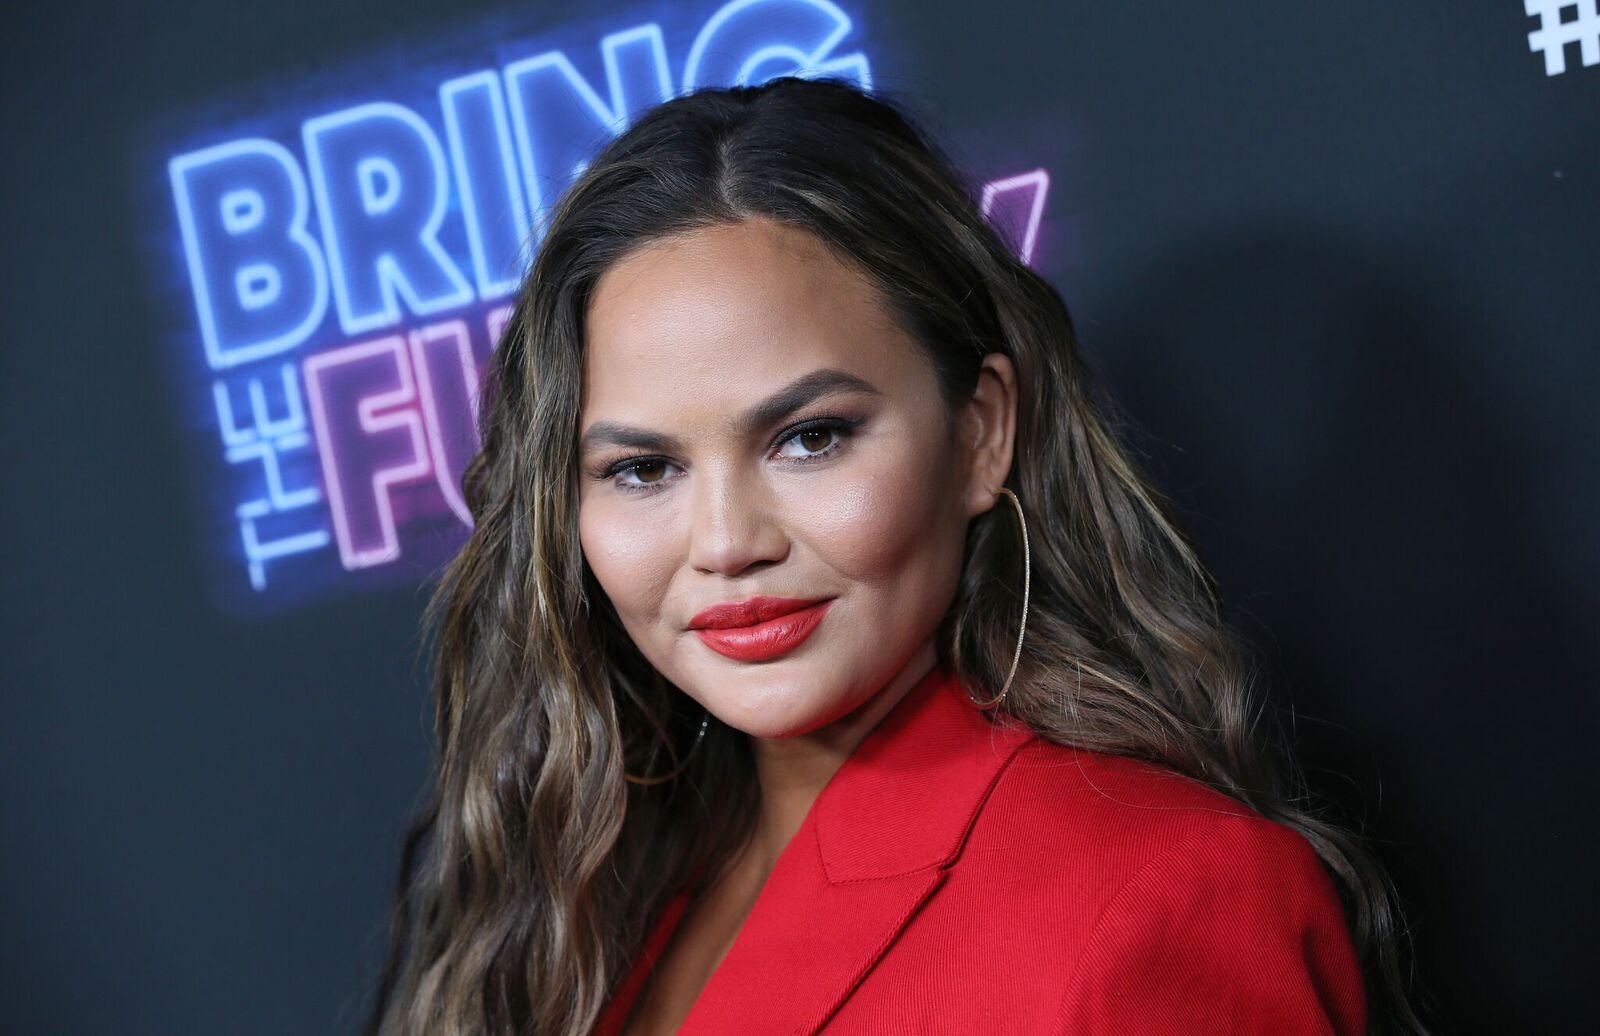 Chrissy Teigen attends the premiere of NBC's "Bring The Funny" at Rockwell Table & Stage on June 26, 2019 | Photo: Getty Images